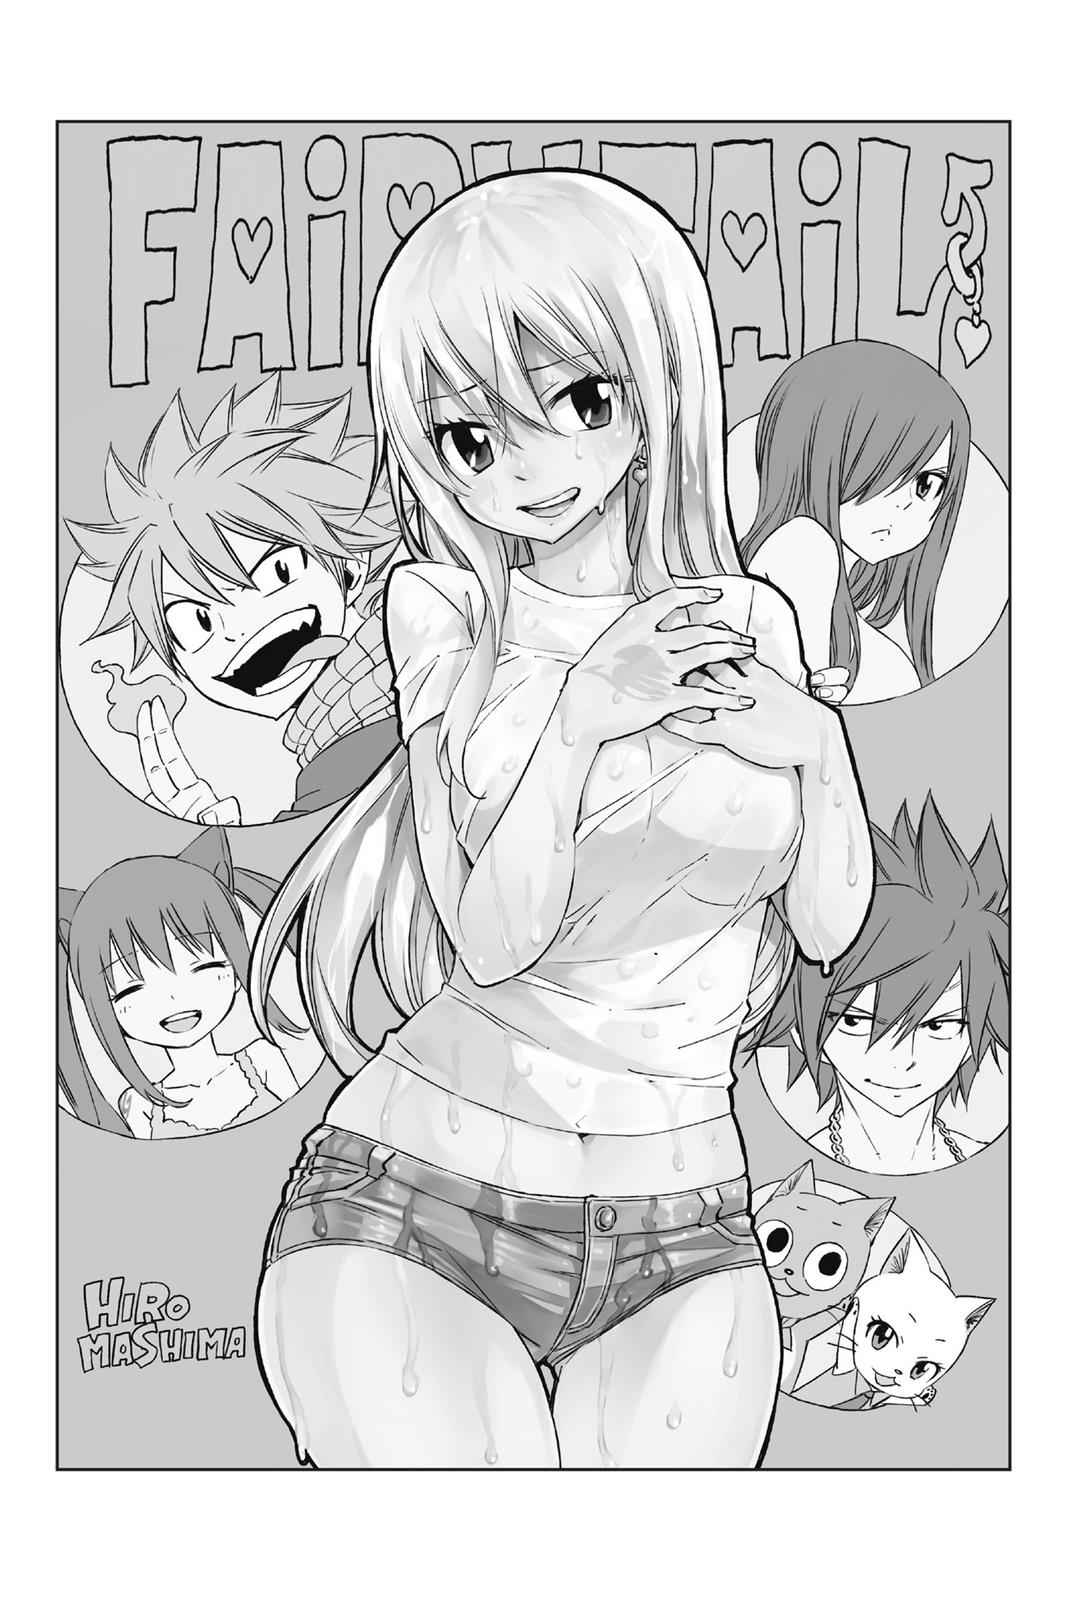 Erza Scarlet in Fairy Tail Manga Volume and Chapter Covers